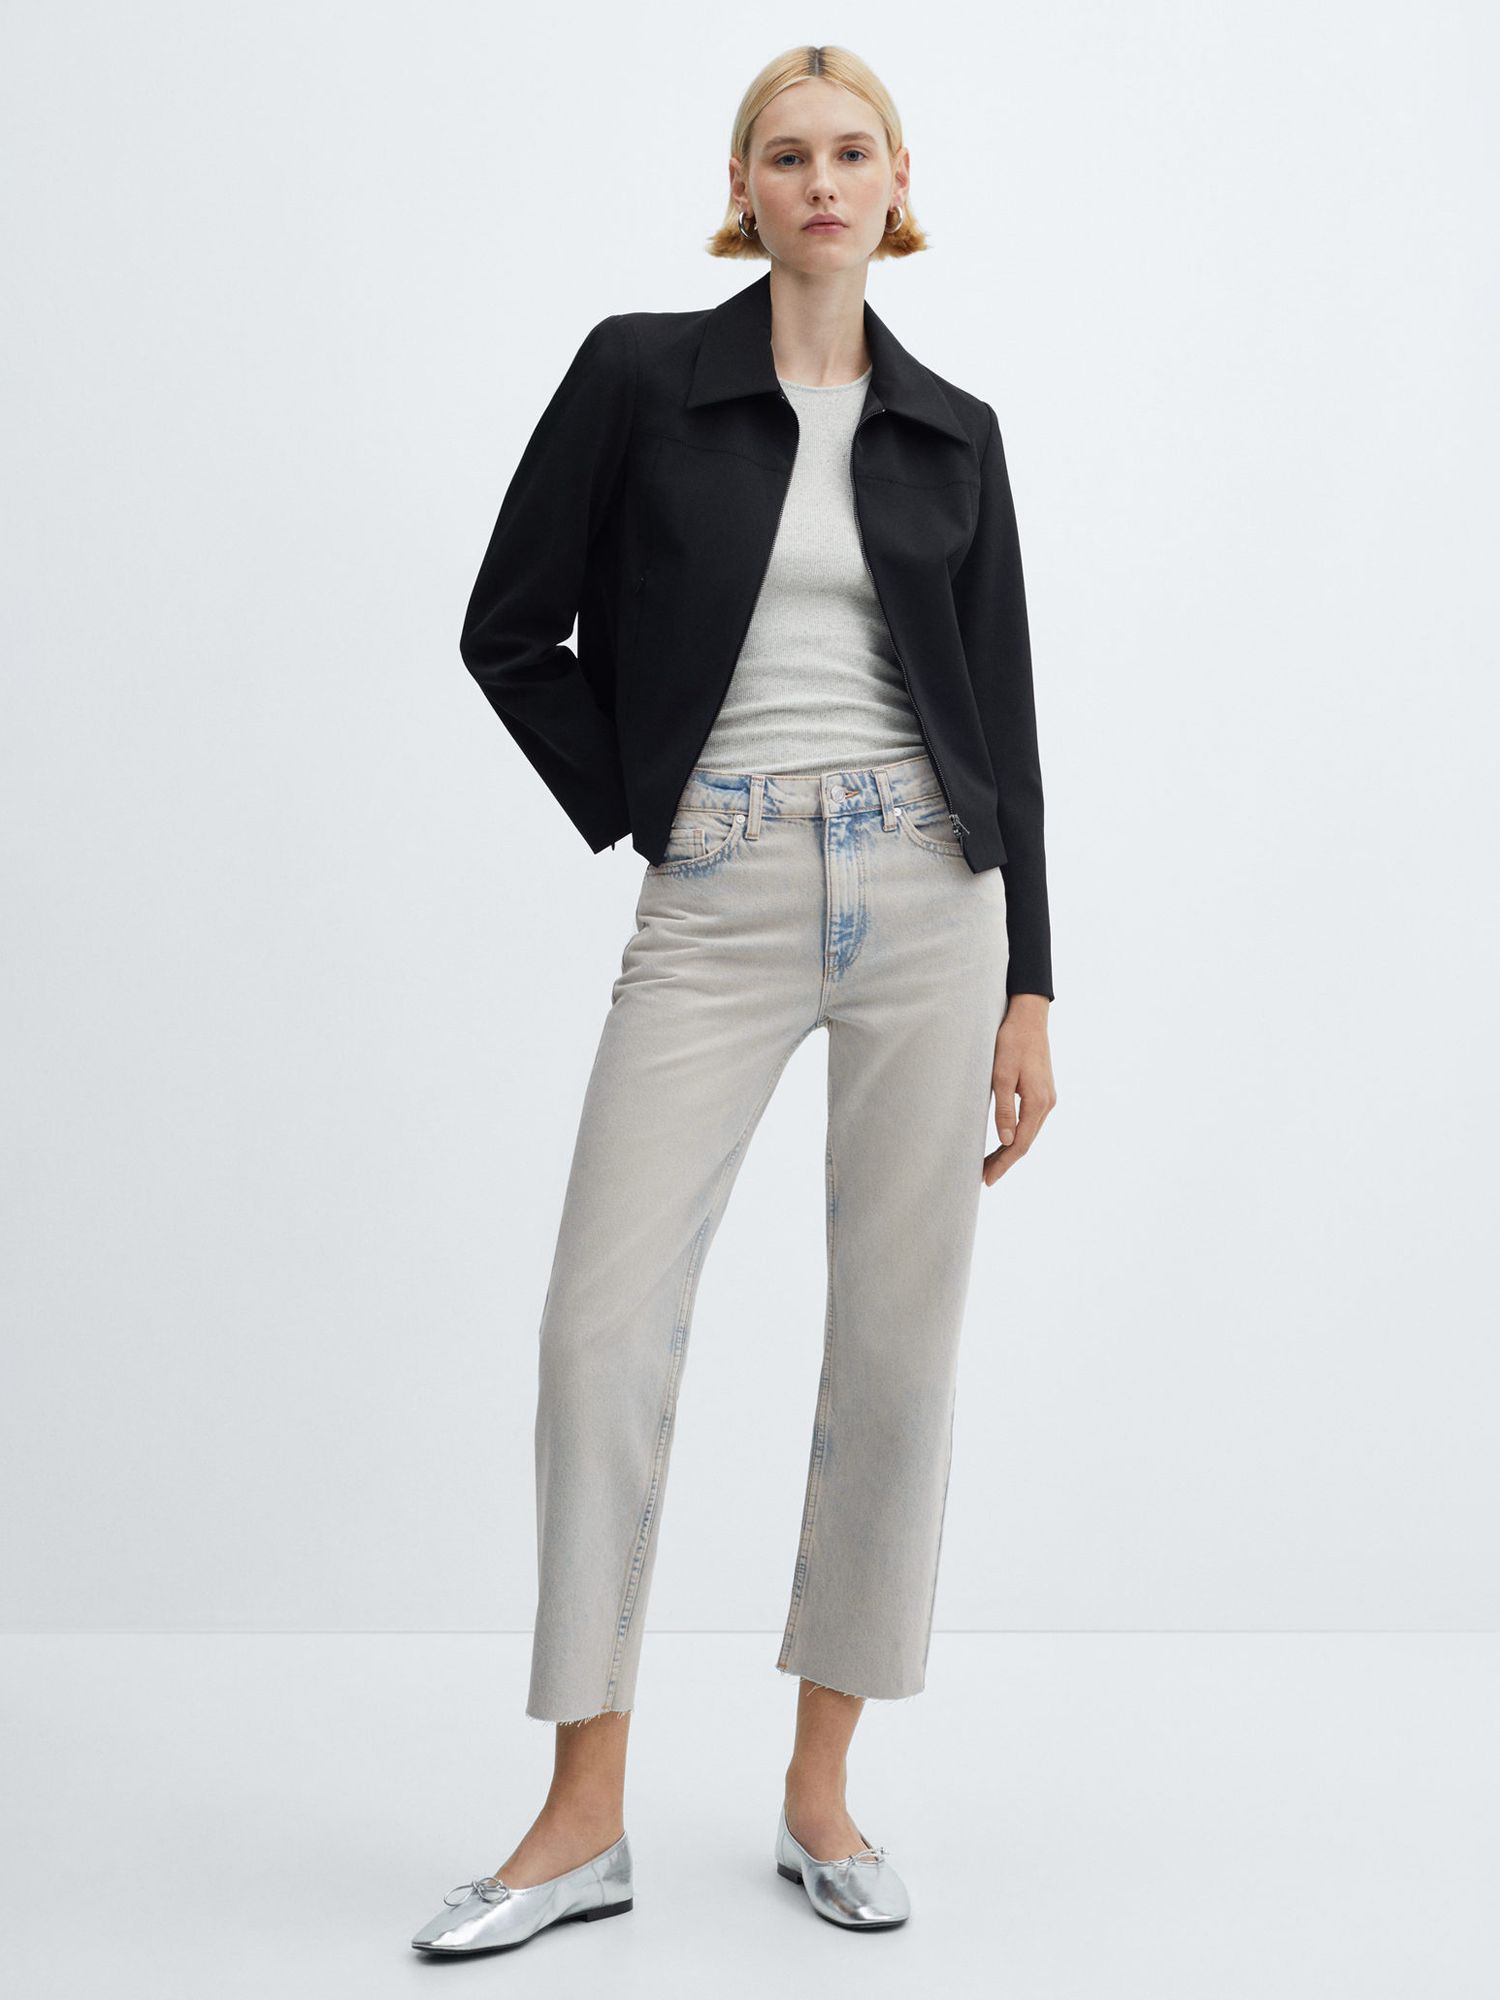 Buy Mango Blanca Straight Cropped Jeans Online at johnlewis.com